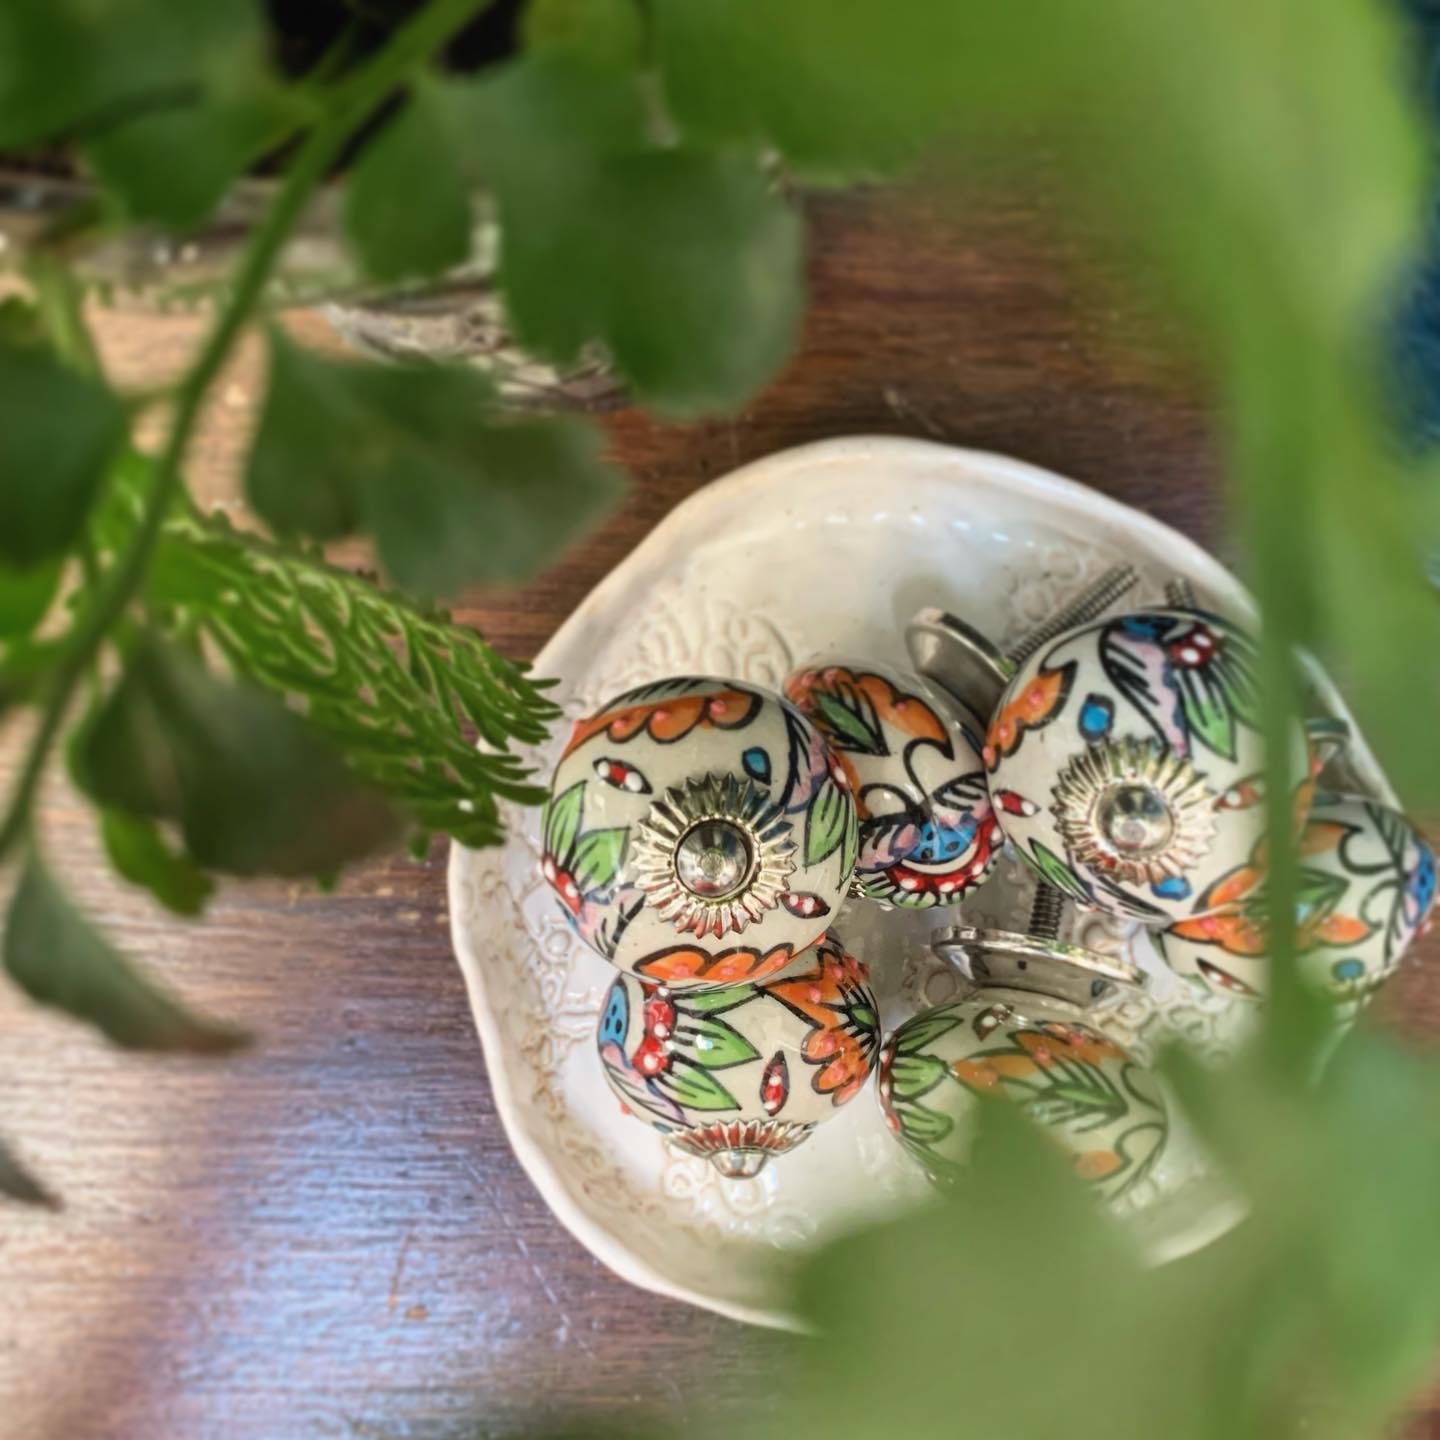 Gorgeous spring inspired knobs ready to adorn our newest batch of door wedges! We’re busy stocking up this week for the Bristol @thecraftandflea on Sunday! Our first real life market of 2021 🥳Would love to see you there! You can purchase tickets through the @thecraftandflea website.